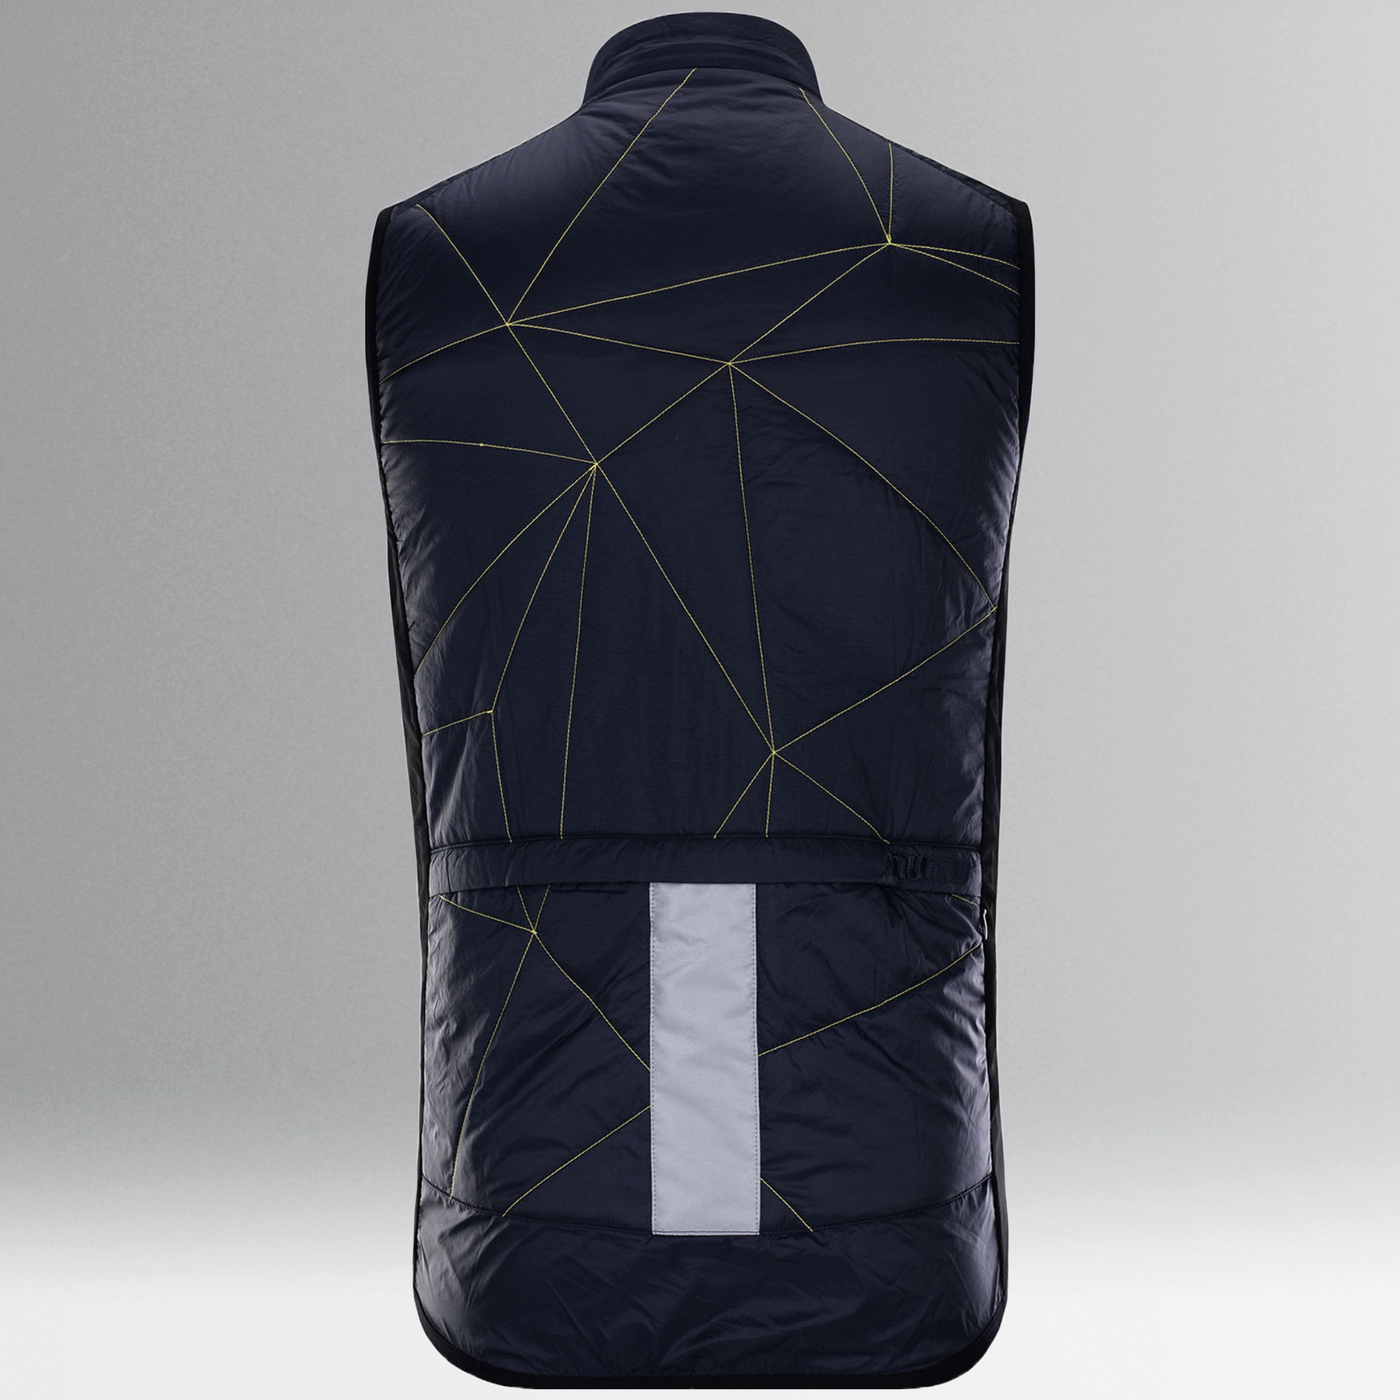 Thermal Cycling Vest